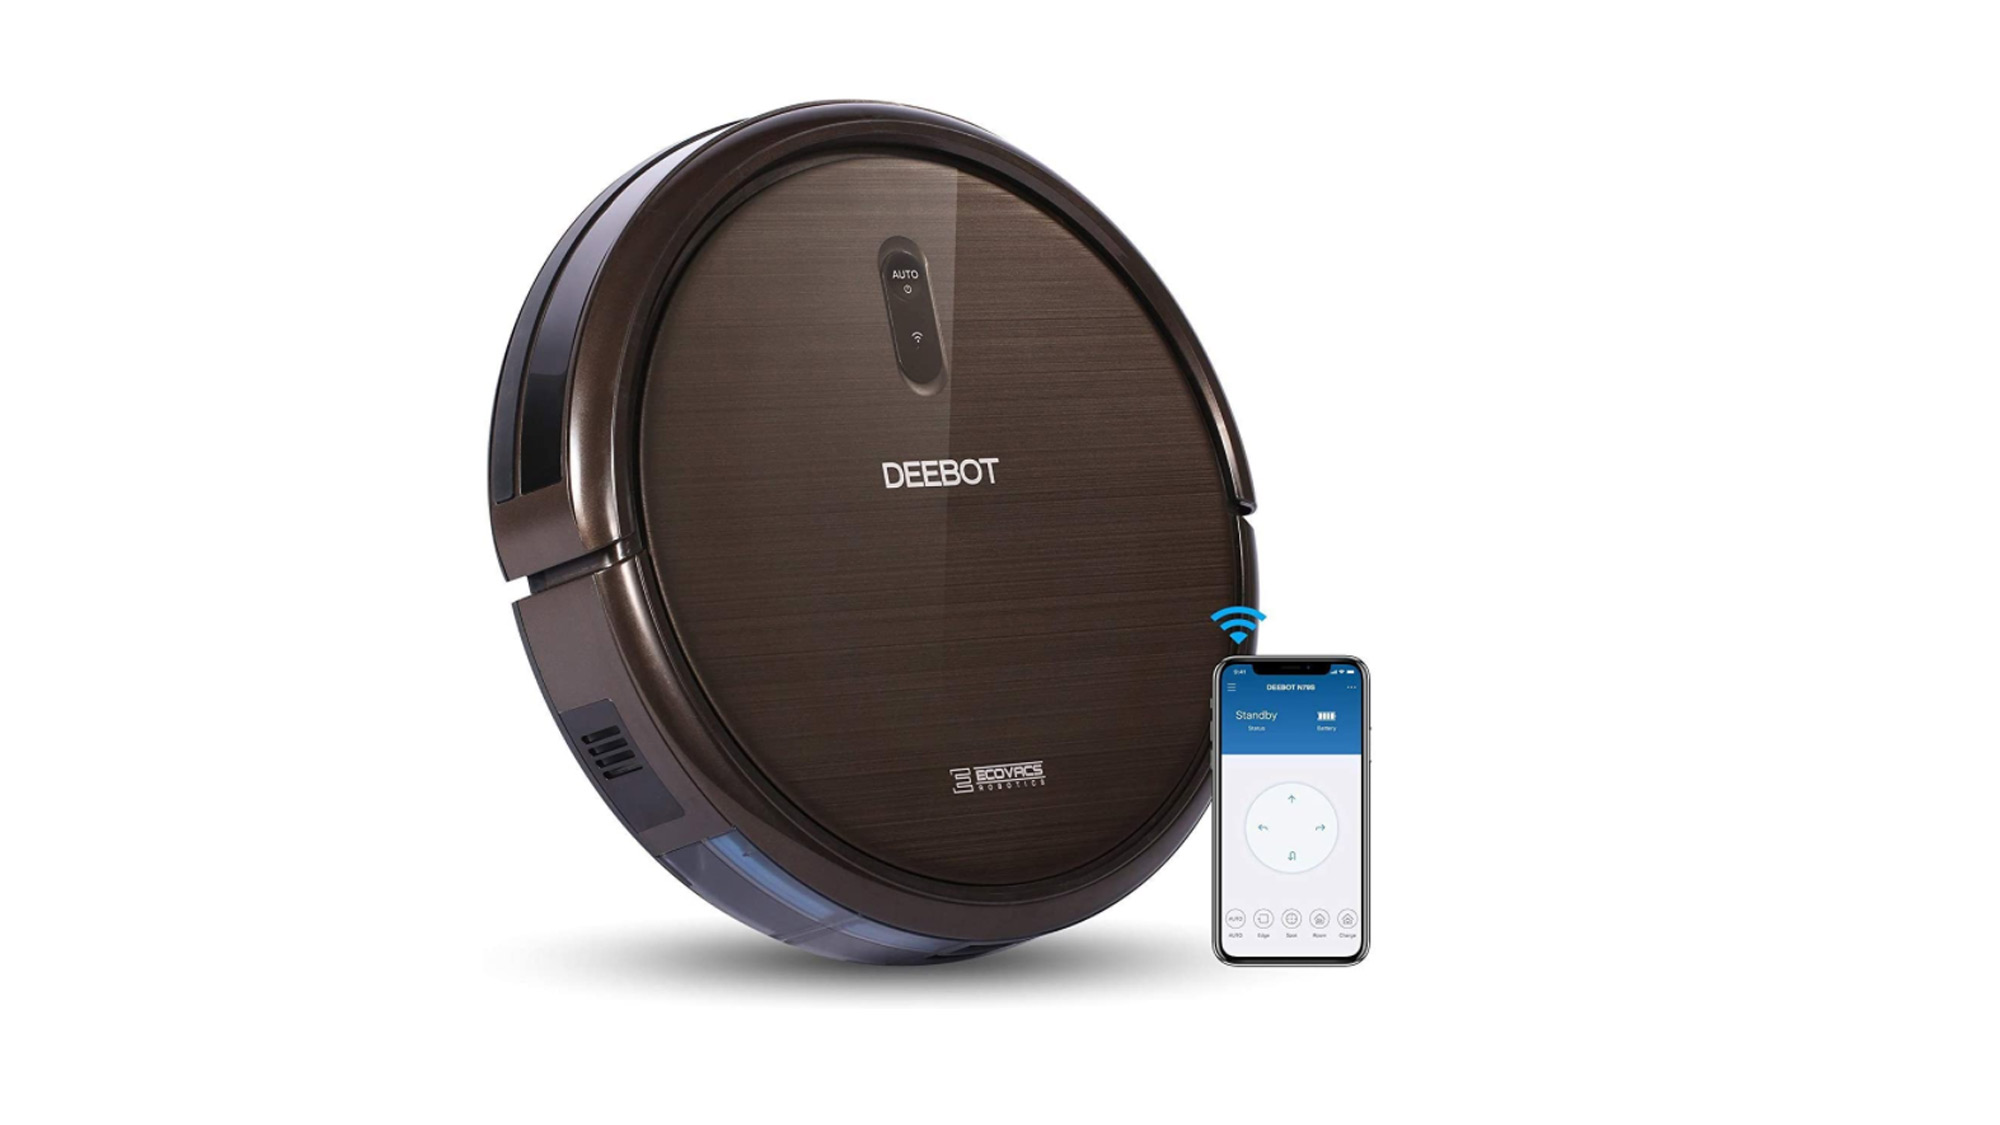 Best robot vacuum 2021 the top robovacs we've tested from Roomba